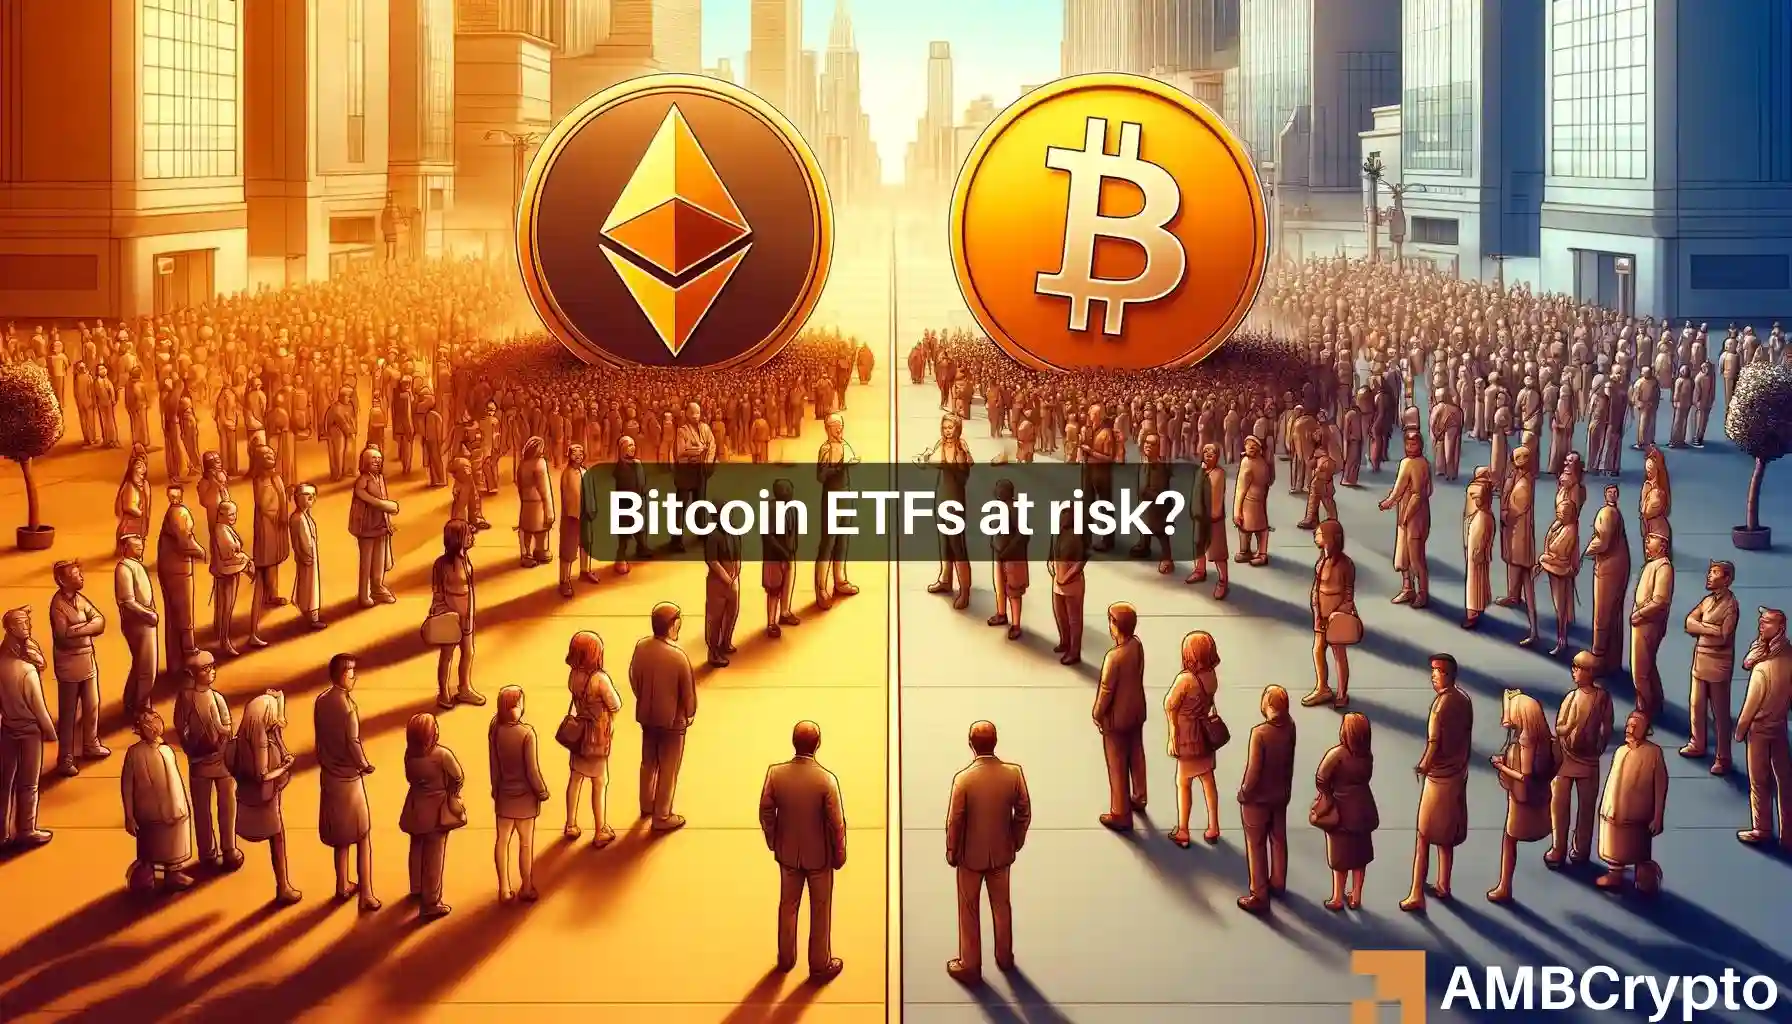 Bitcoin ETFs at risk amidst ETH ETF approval?